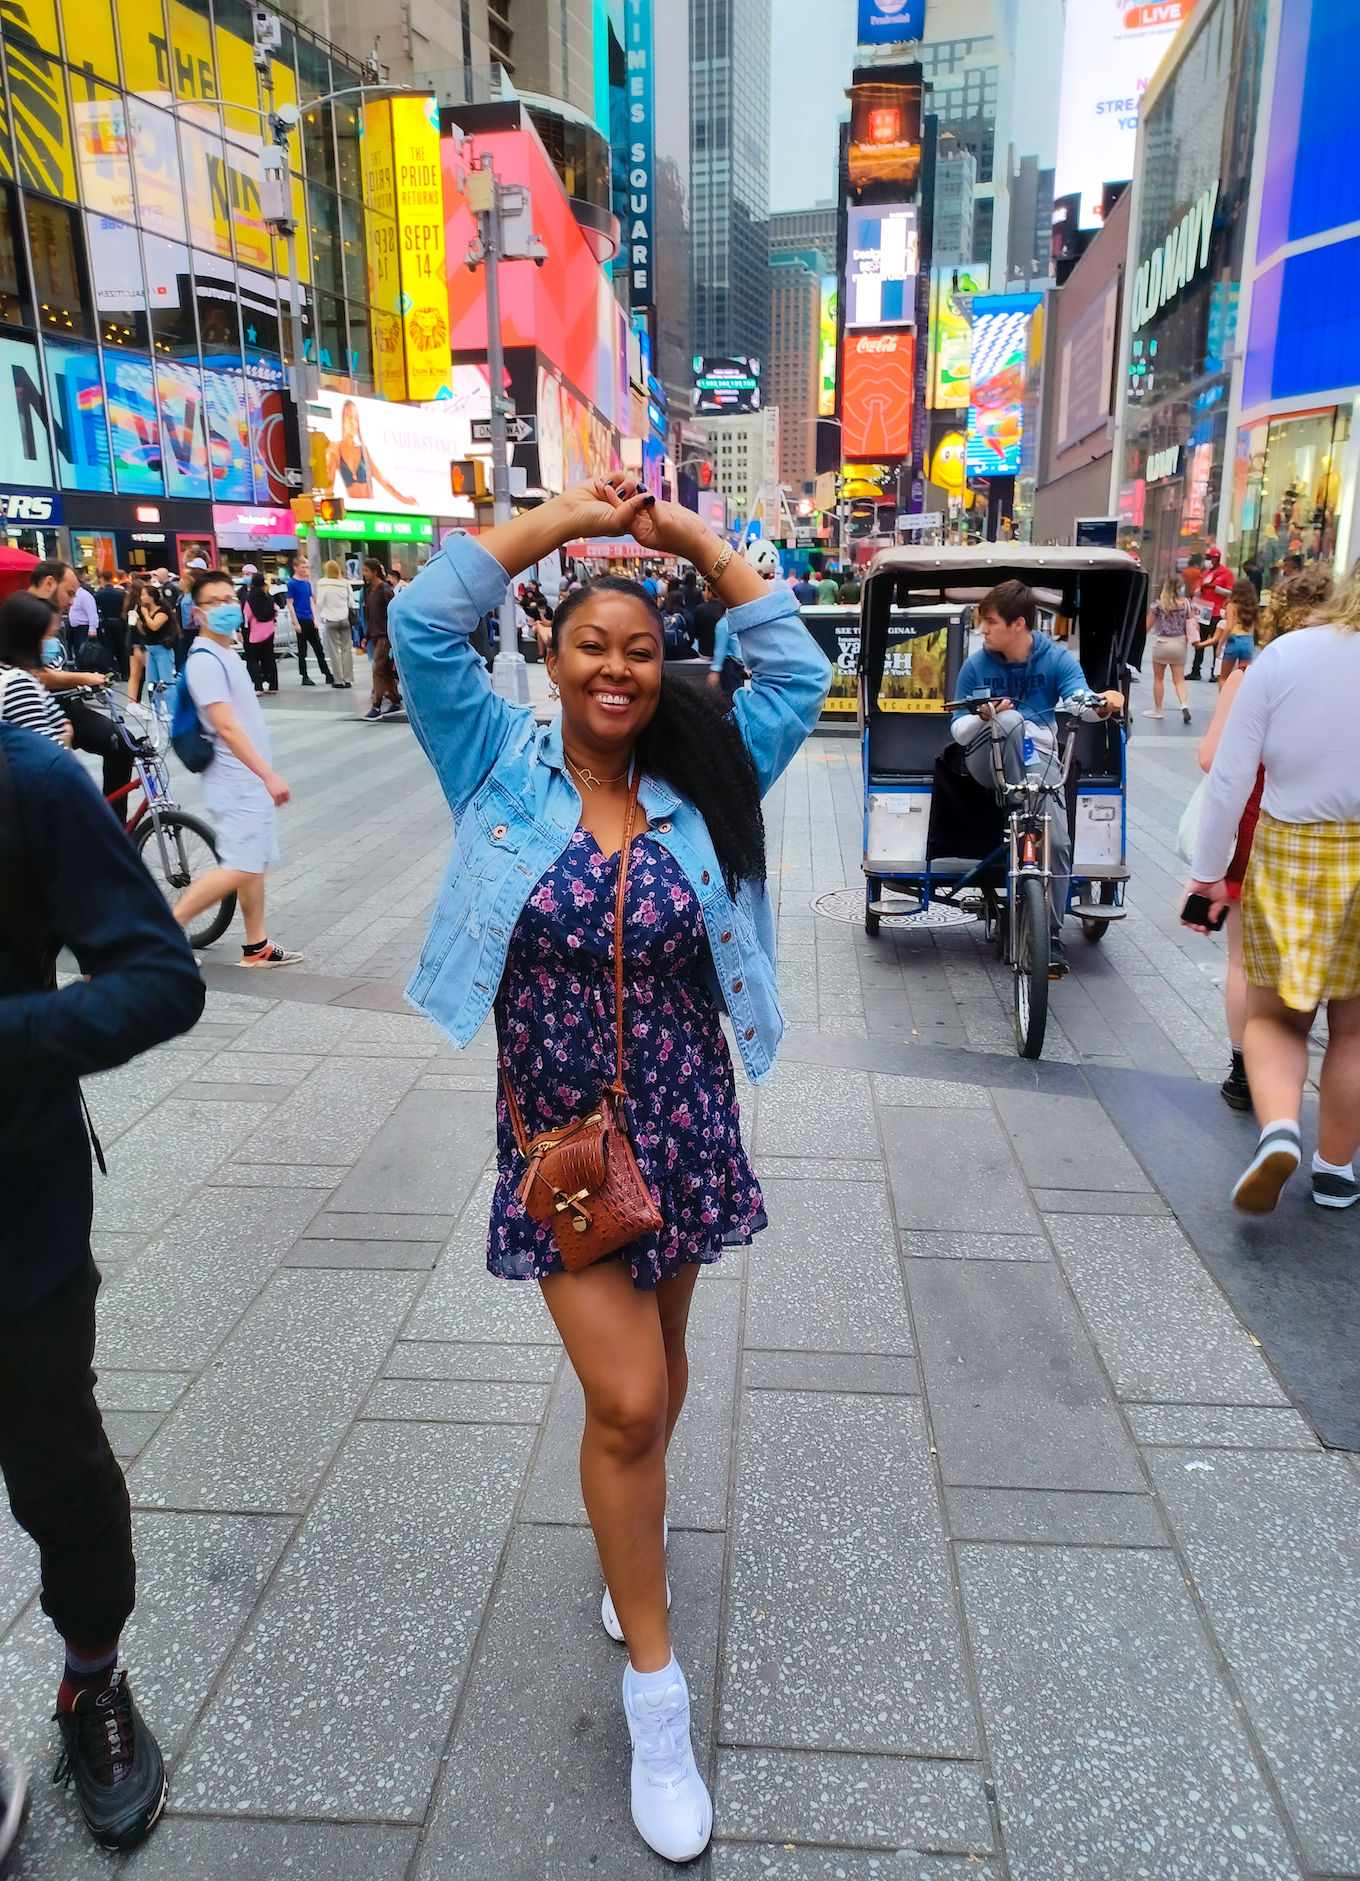 This Bahamian Gyal blogger Rogan Smith smiles in Times Square New York City